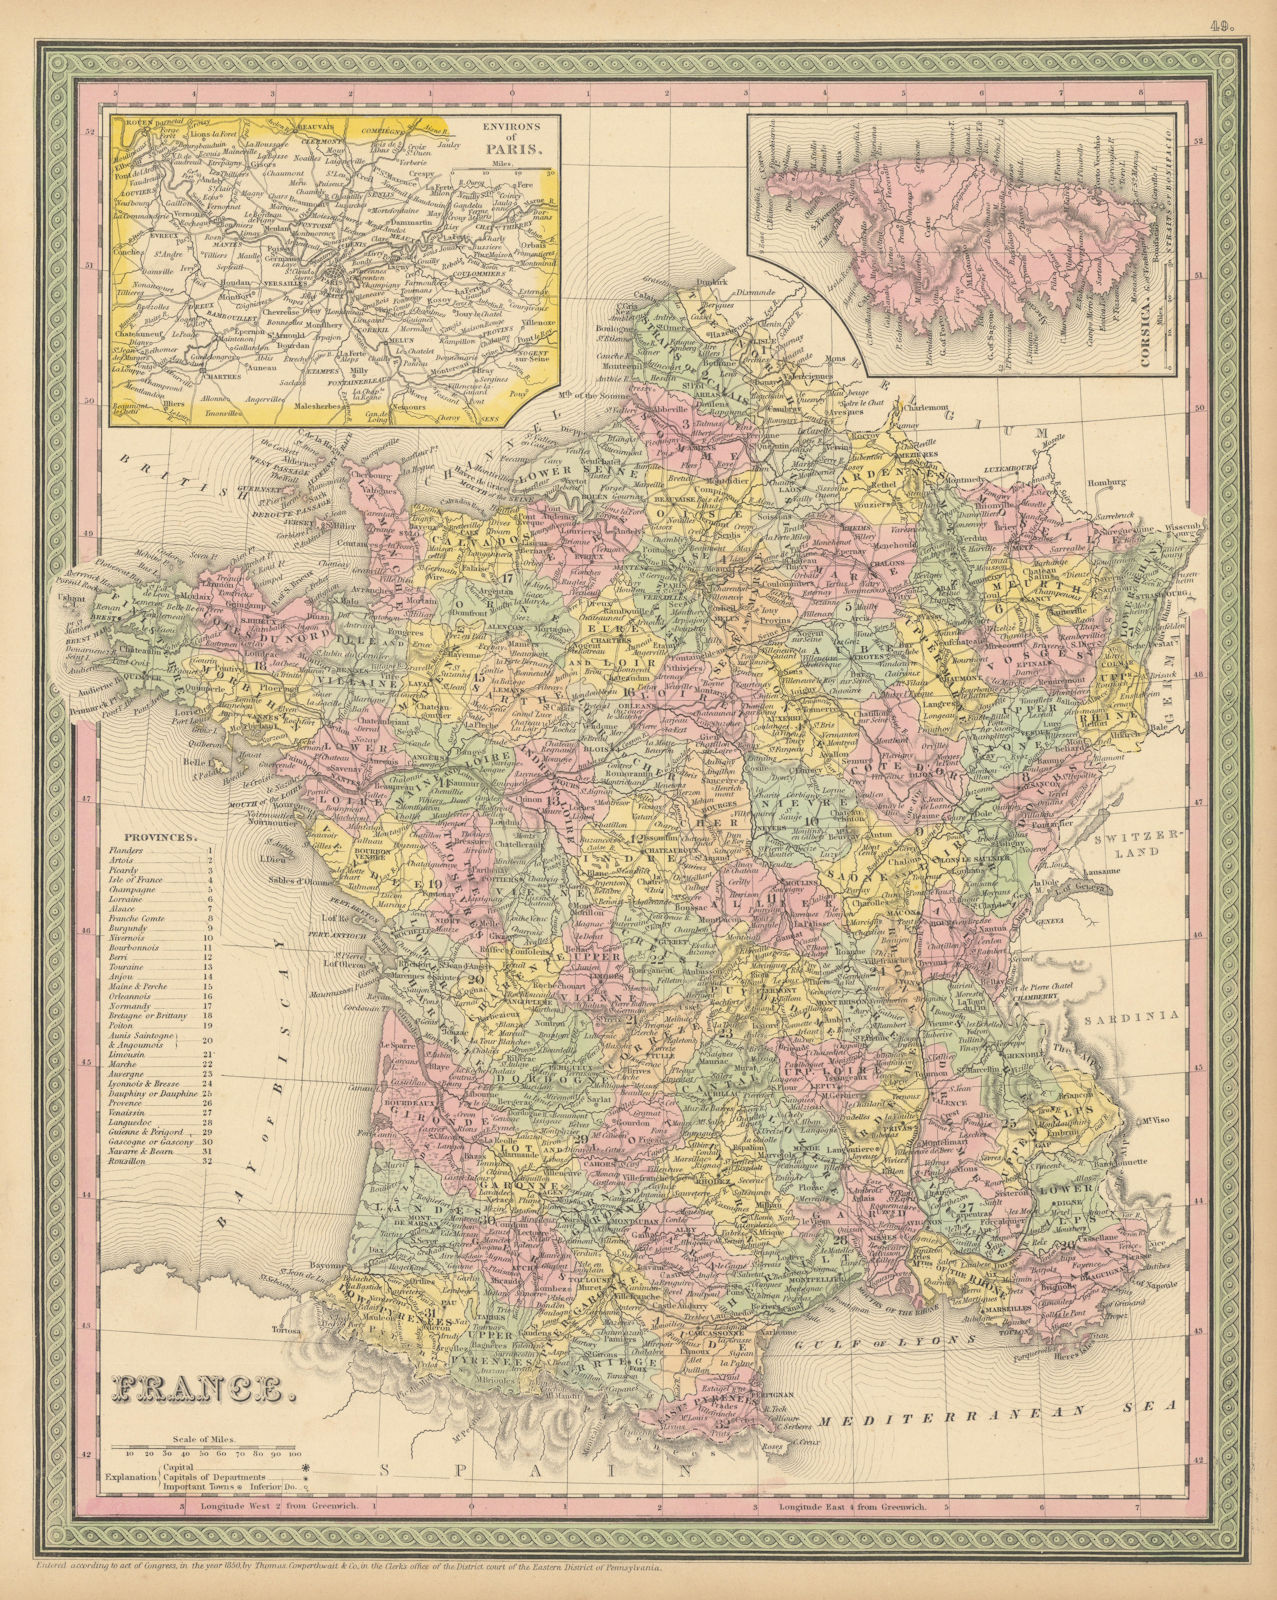 France in departments, without Alps/Savoie. THOMAS, COWPERTHWAIT 1852 old map